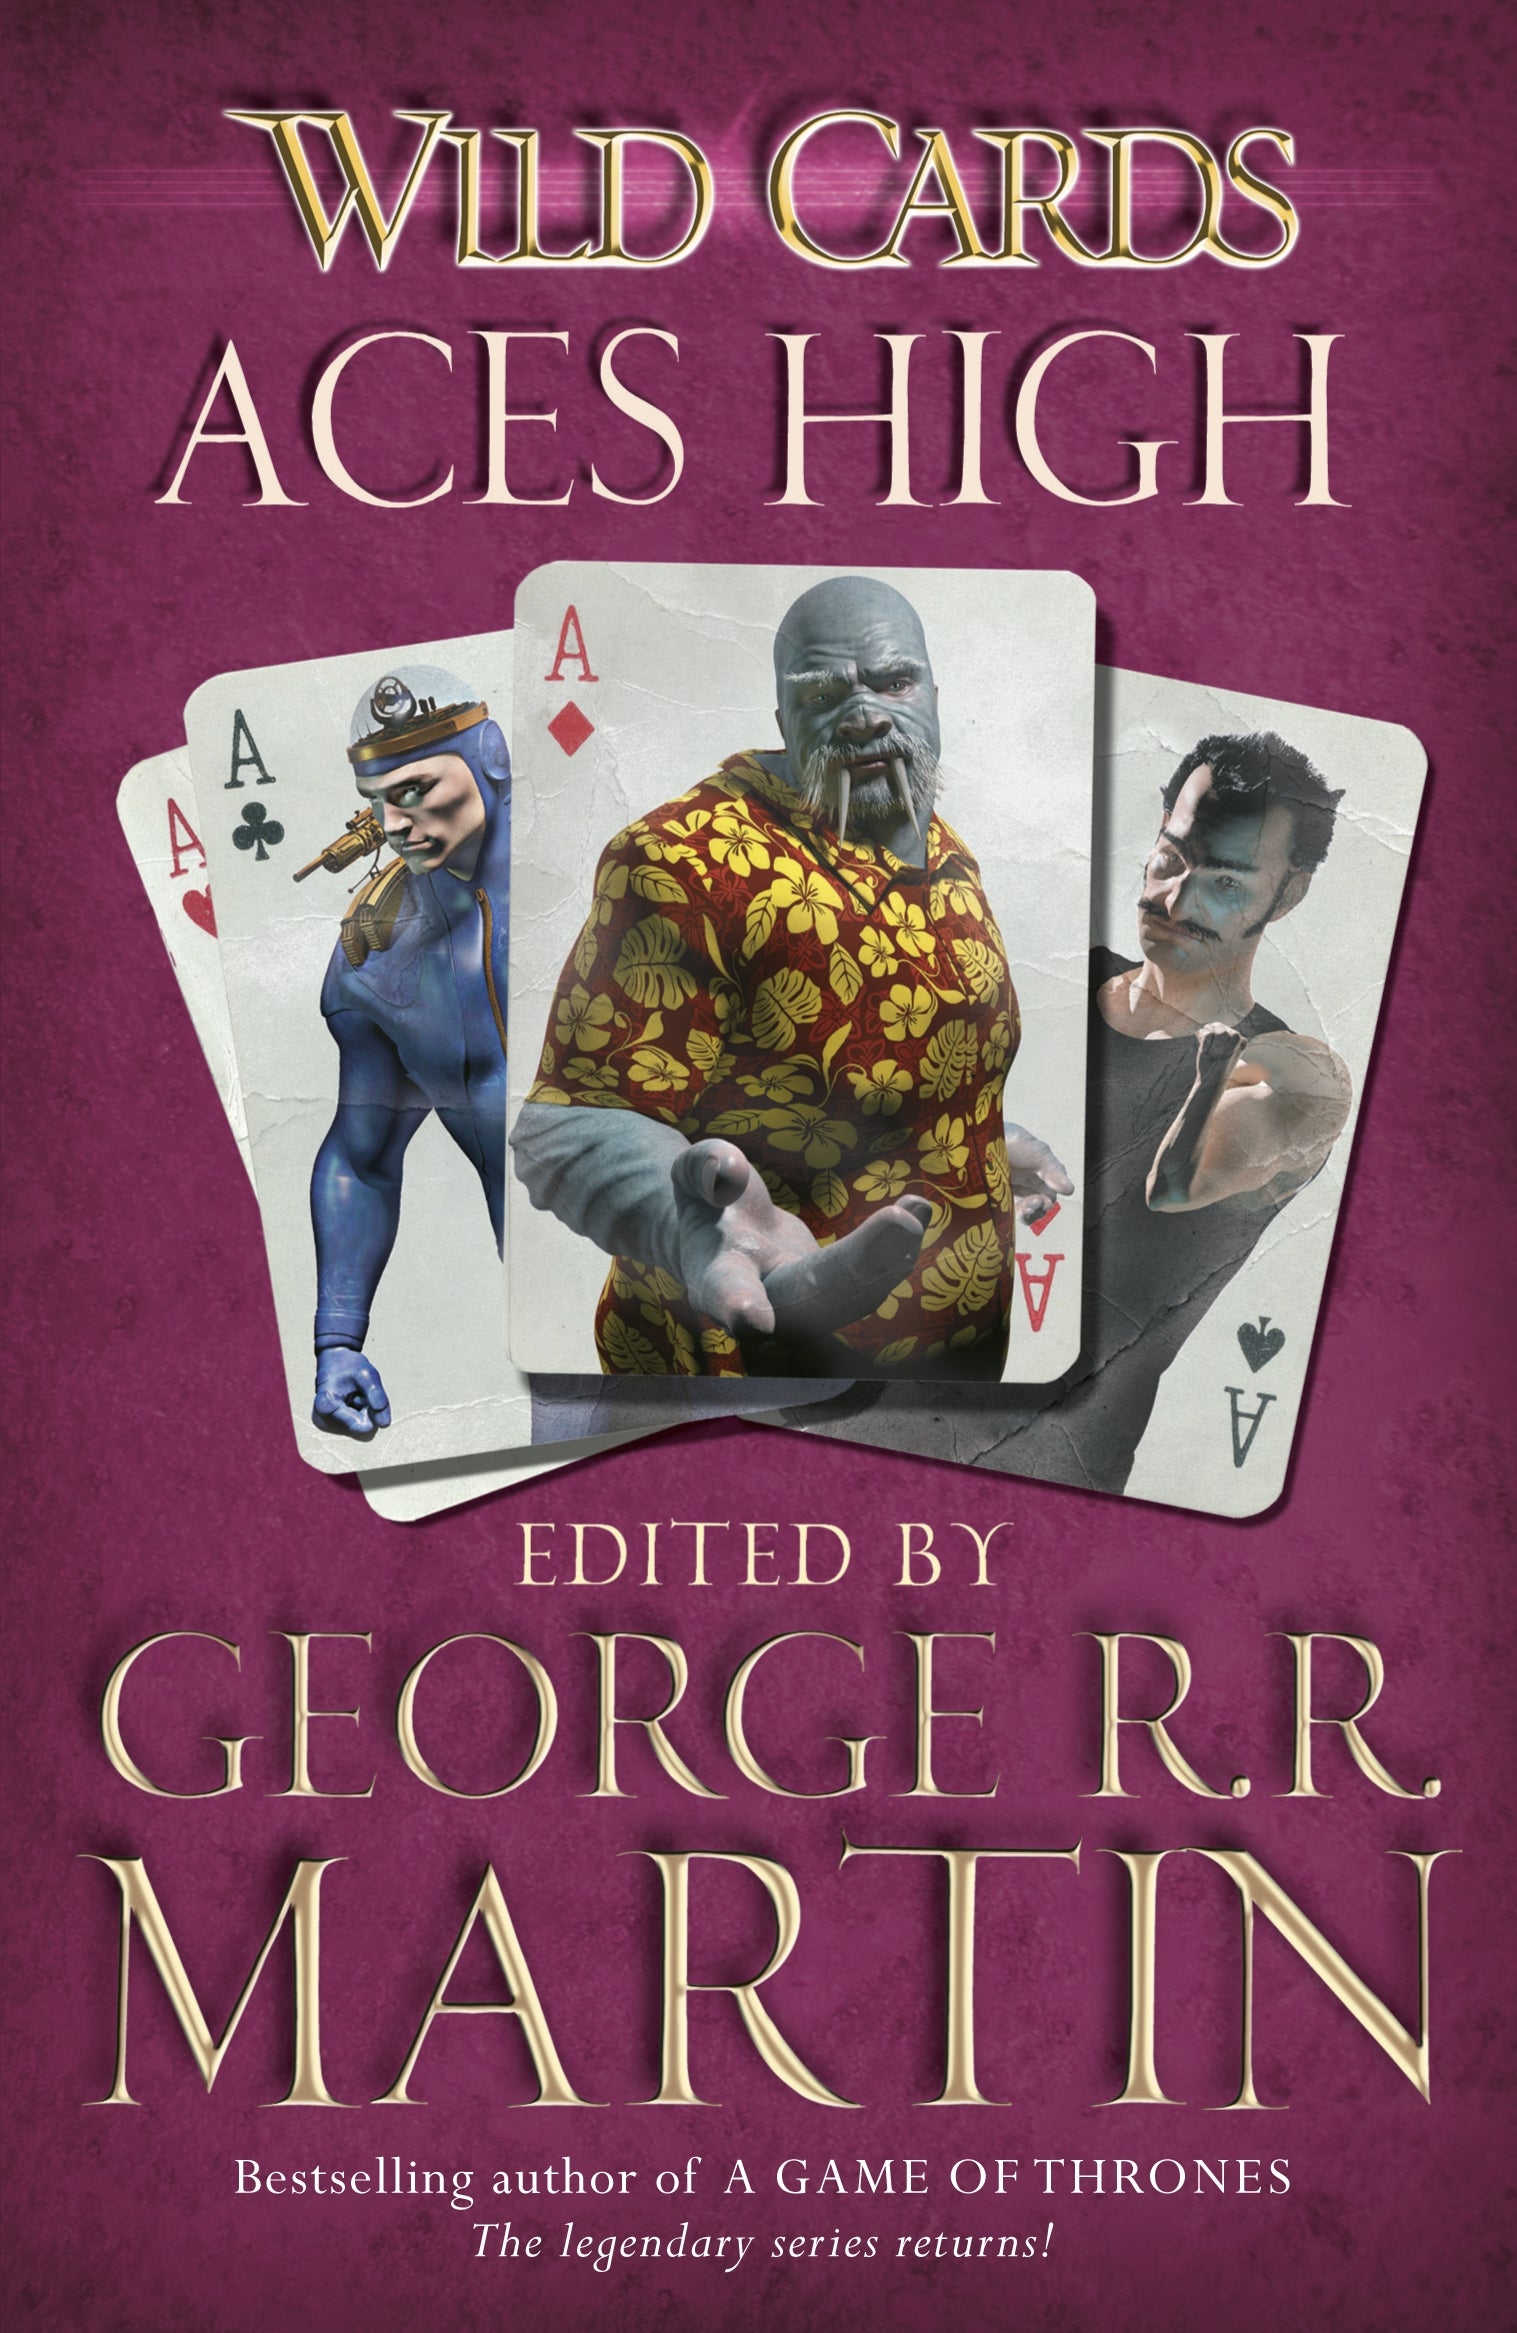 Wild Cards: Aces High by George R.R. Martin